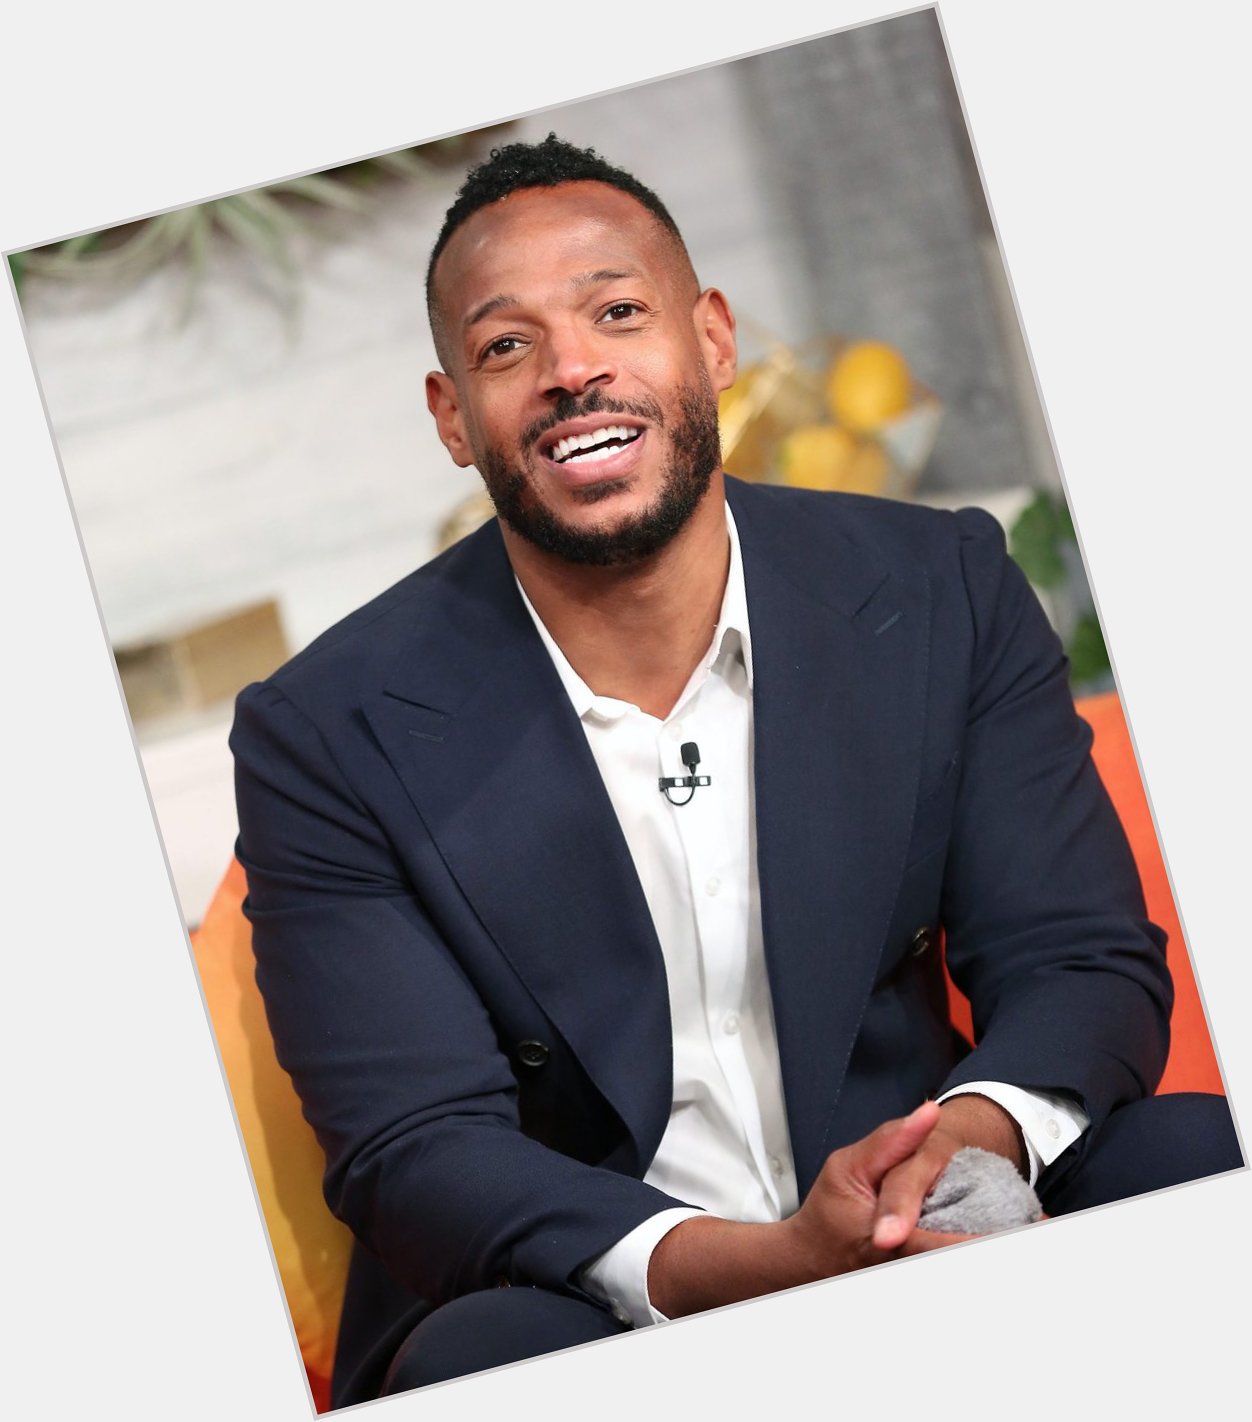 Happy Birthday to the one and only Marlon Wayans! 